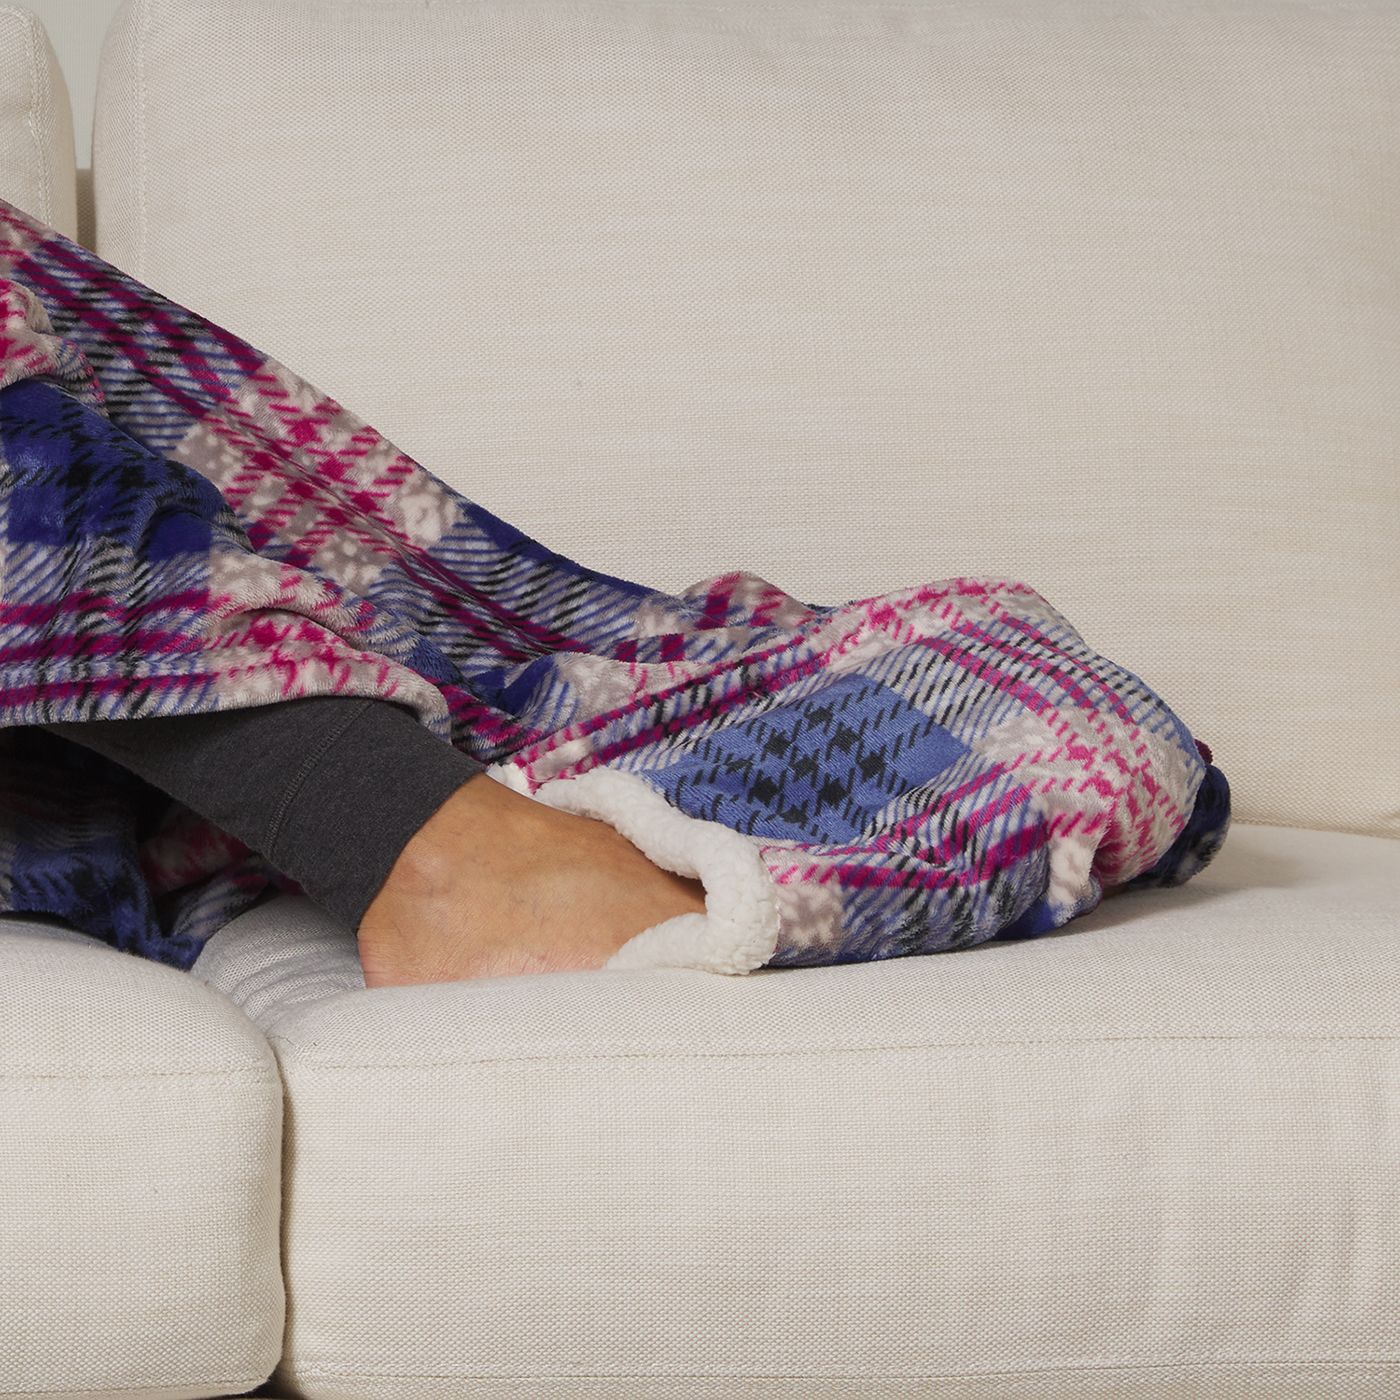 ClimateRight by Cuddl Duds Oversized Throw With A Cozy Sherpa Pocket For Your Feet, Red/Blue Plaid - image 3 of 6